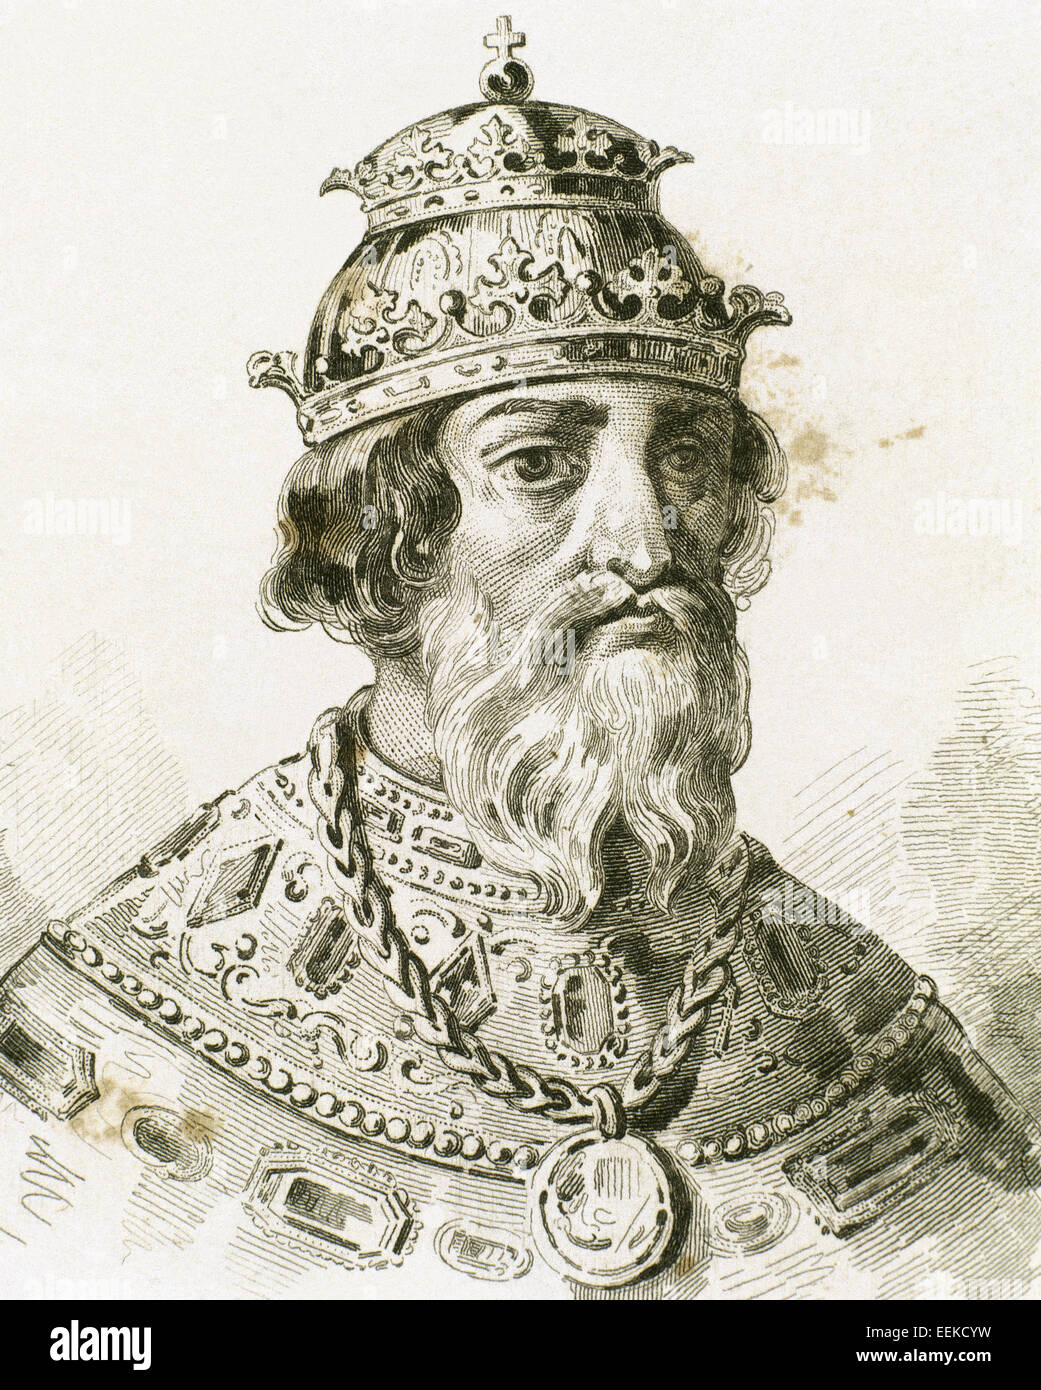 Ivan IV Vasilyevich (1530-1584), known as Ivan the Terrible. Grand Prince of Moscow (1533-1547) and Tsar of All the Russias (1547-1584). Portrait. Engraving. Stock Photo